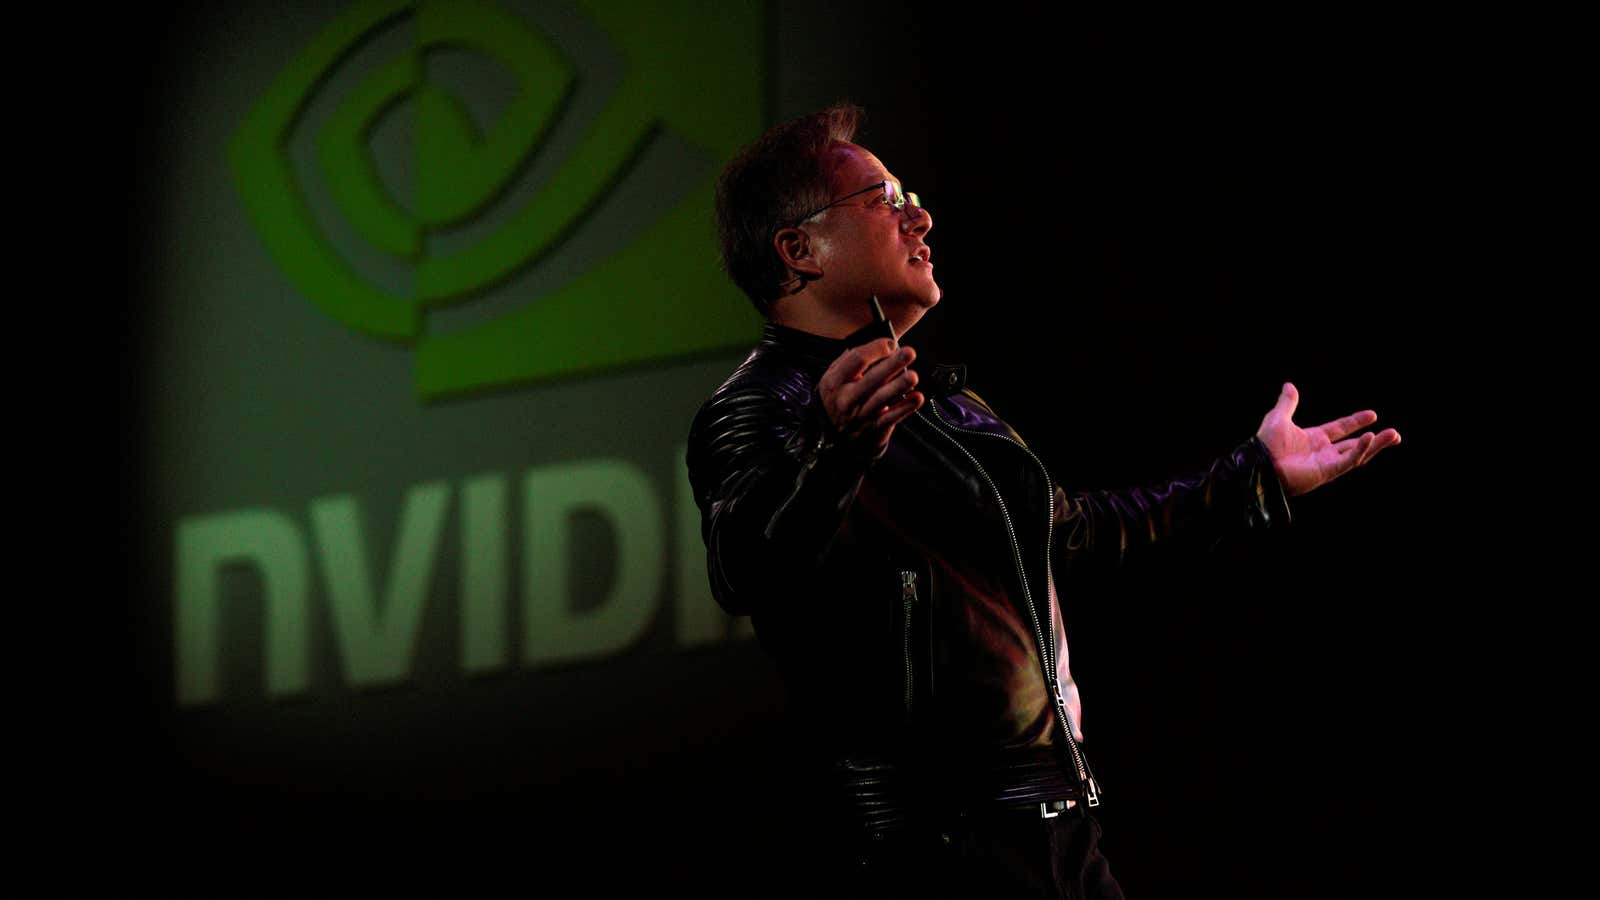 CEO and co-founder of Nvidia, Jensen Huang, has made big bets with the company’s future.